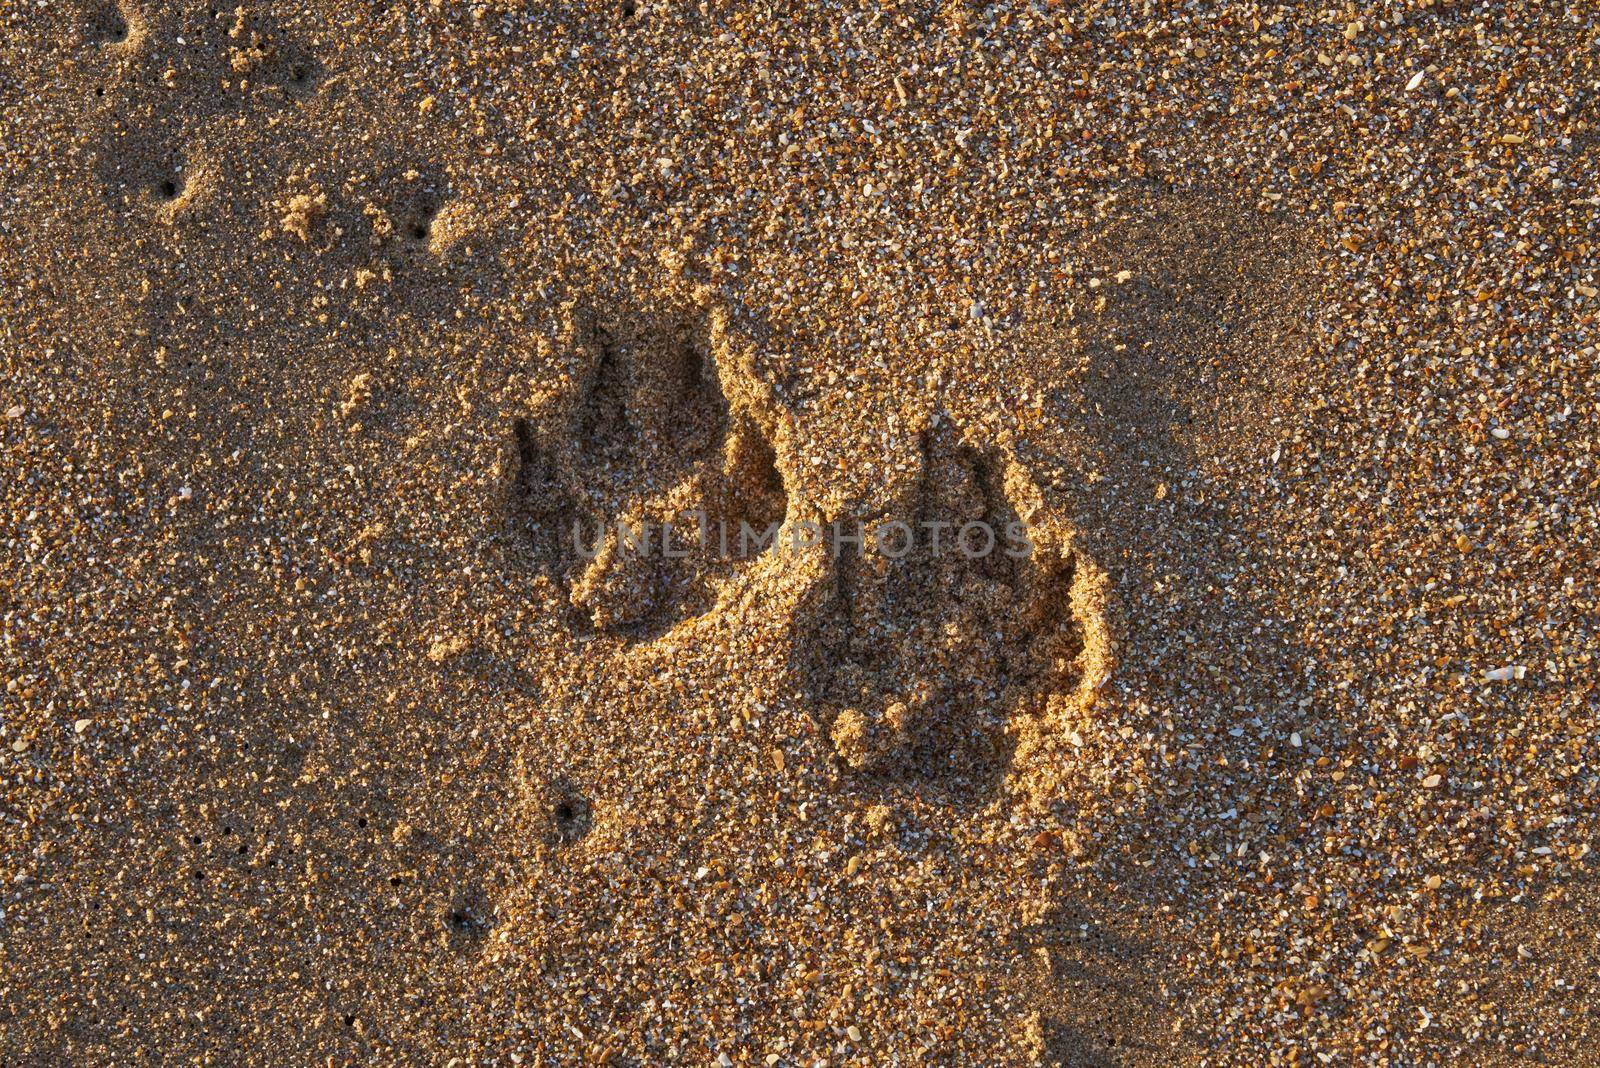 Two dog's foot prints in the sand on the beach